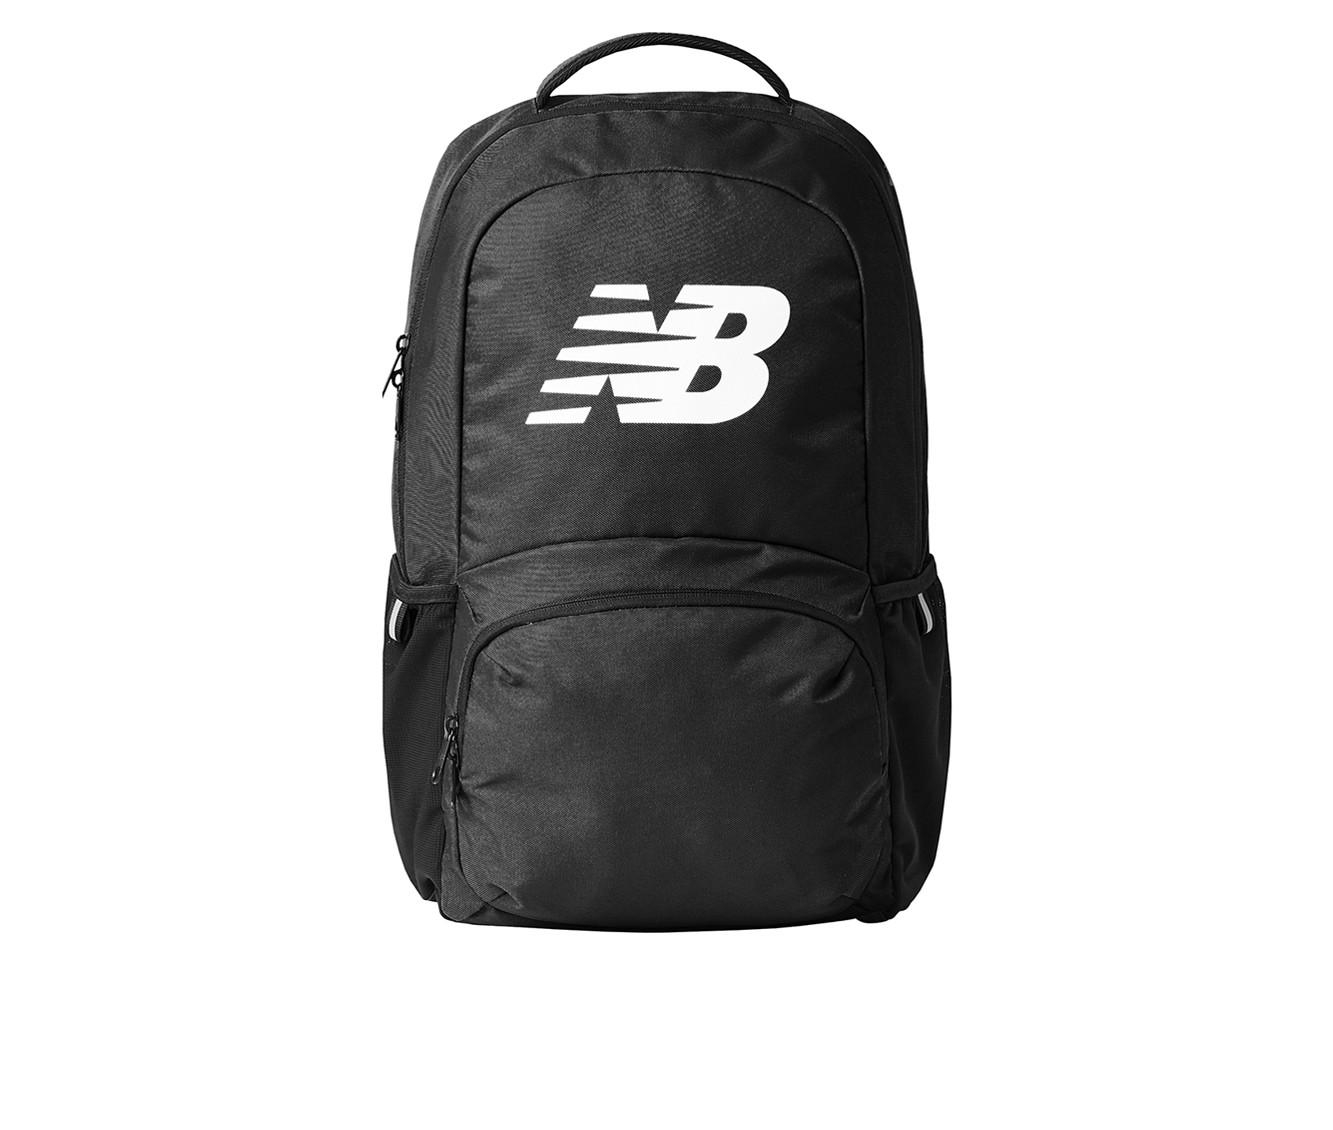  New Balance Mini Backpack, Legacy Micro Travel Bag For Men and  Women, Black and Red, One Size | Casual Daypacks